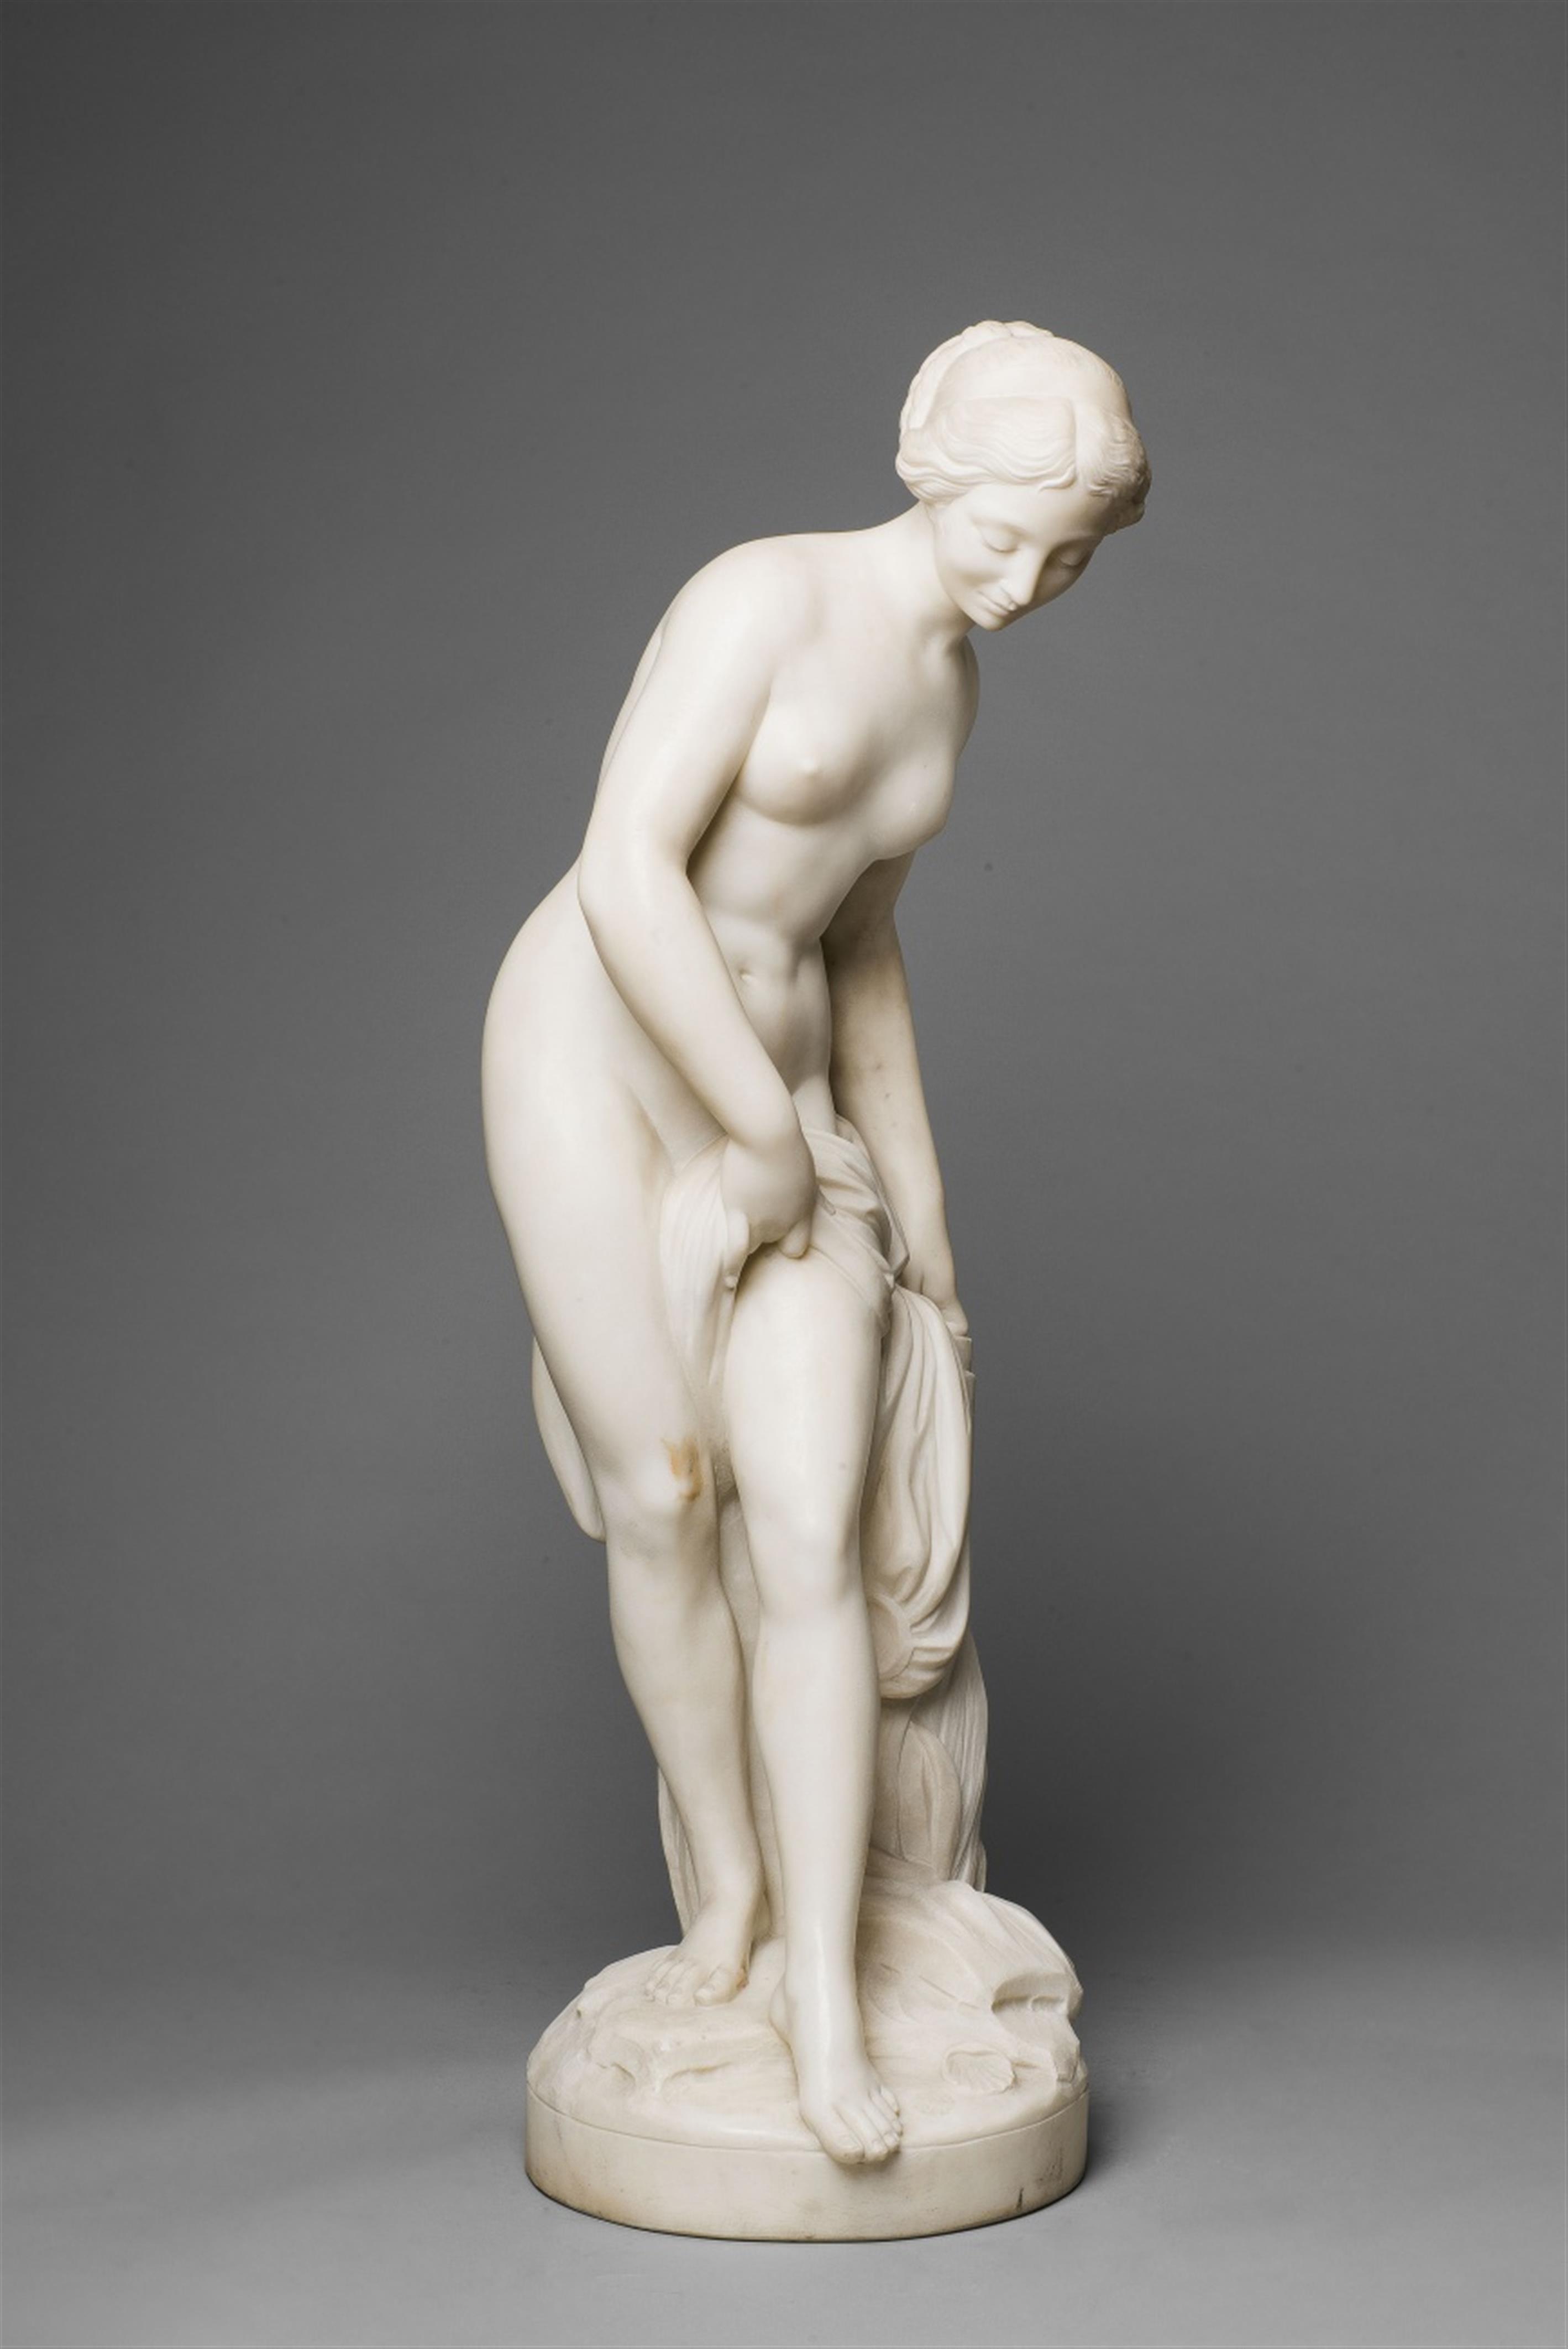 Baigneuse nach Etienne-Maurice Falconet - image-6